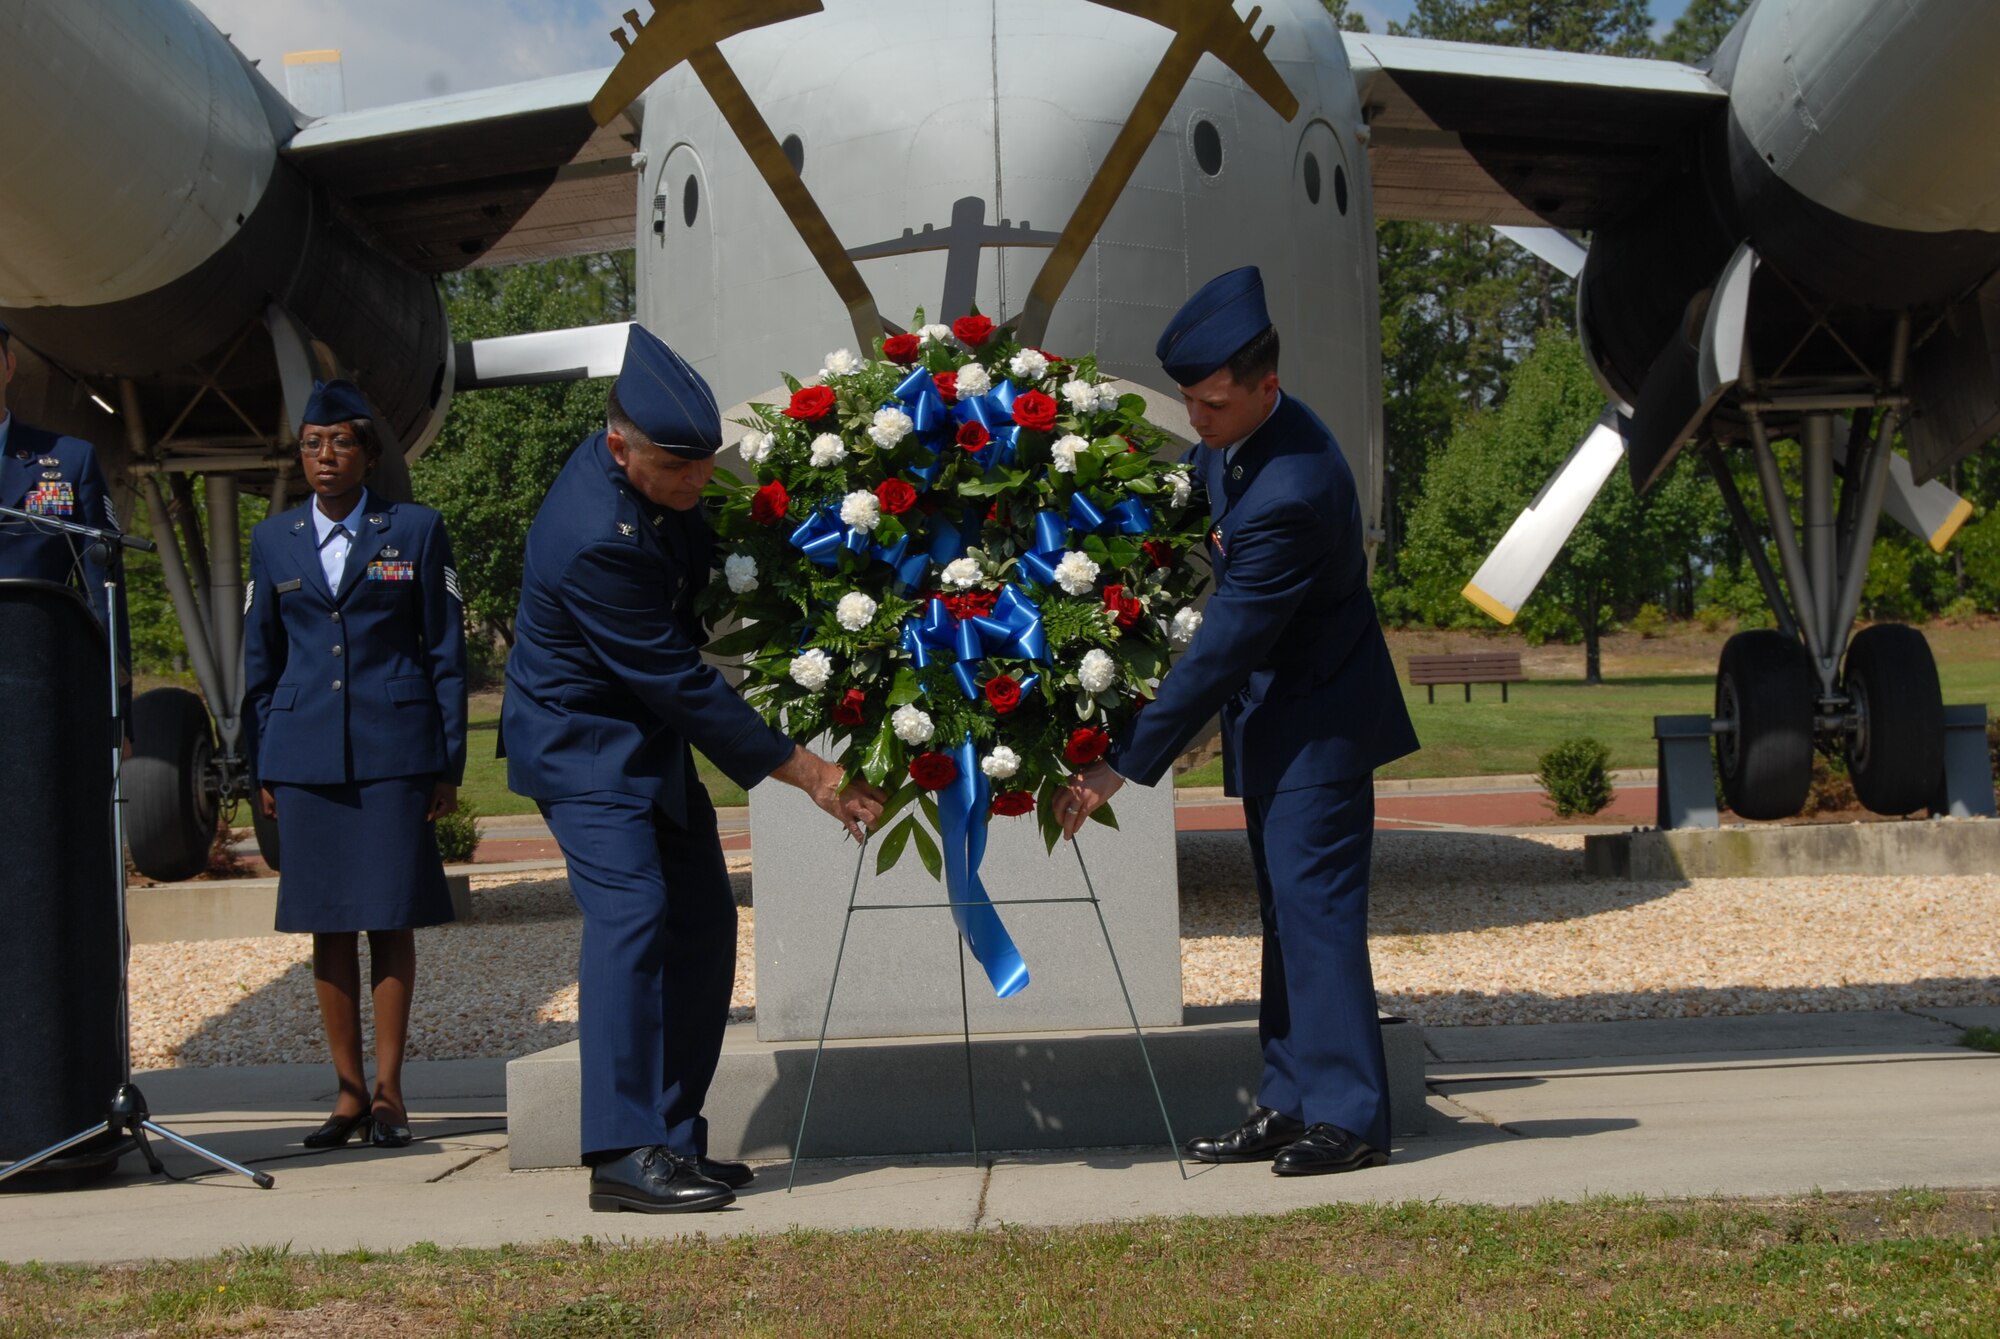 Col. John McDonald, 43rd Airlift Wing Commander, and Airman Basic Samuel Underwood, 43rd Logistics Readiness Squadron, places the wreath on the Air Park Memorial in celebration of Memorial Day as a way to honor the servicemembers who have sacrificed to provide freedom to the United States. It is tradition at Pope for the most senior and junior ranking Airmen to lay the wreath. (U.S. Air Force Photo by Airman 1st Class Mindy Bloem)
